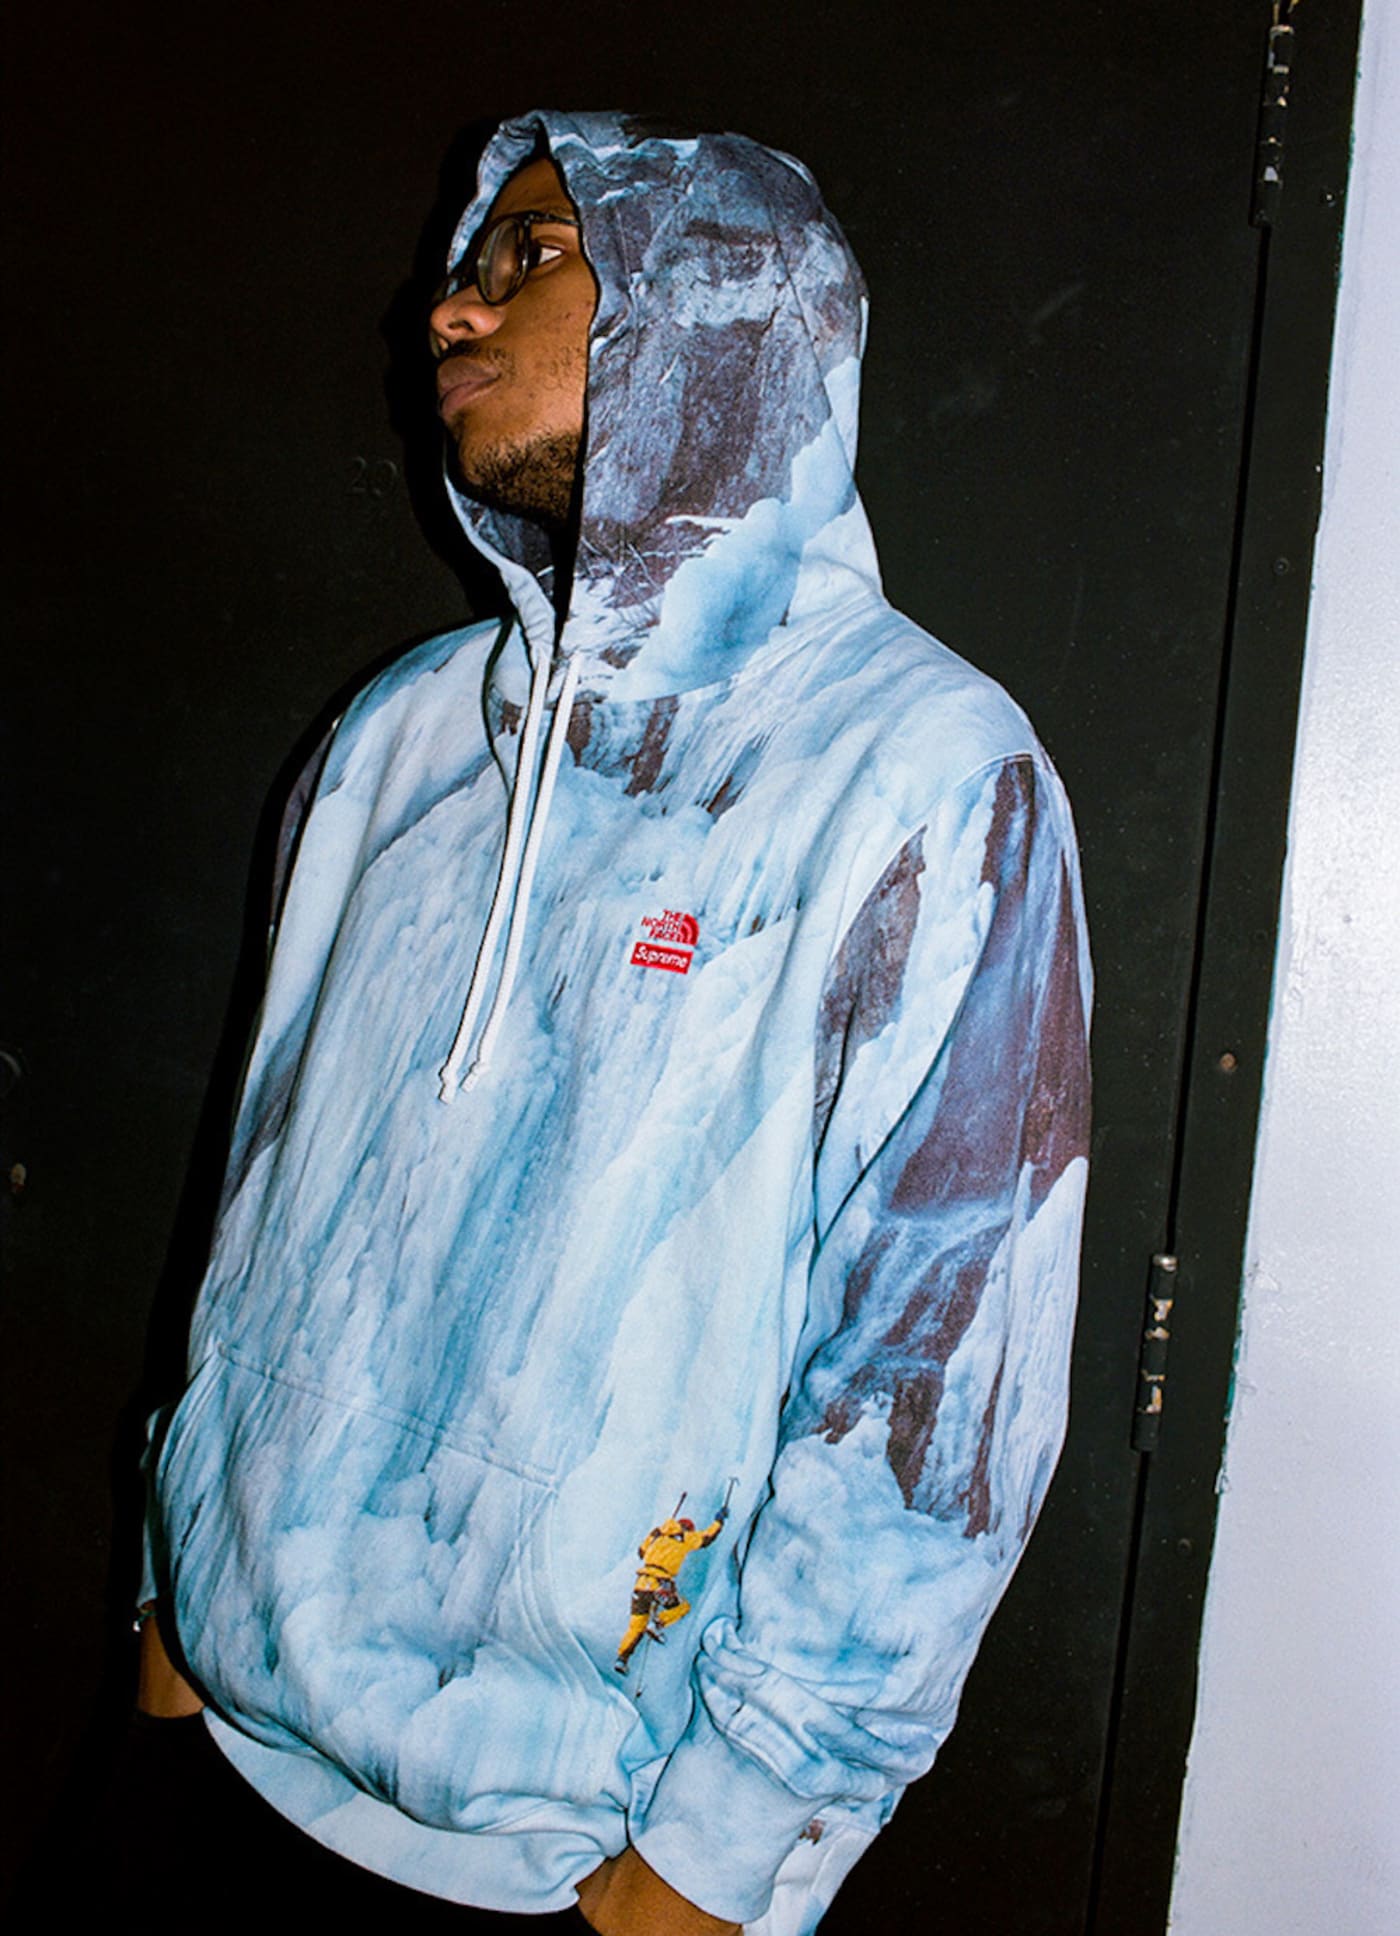 the north face x supreme hoodie